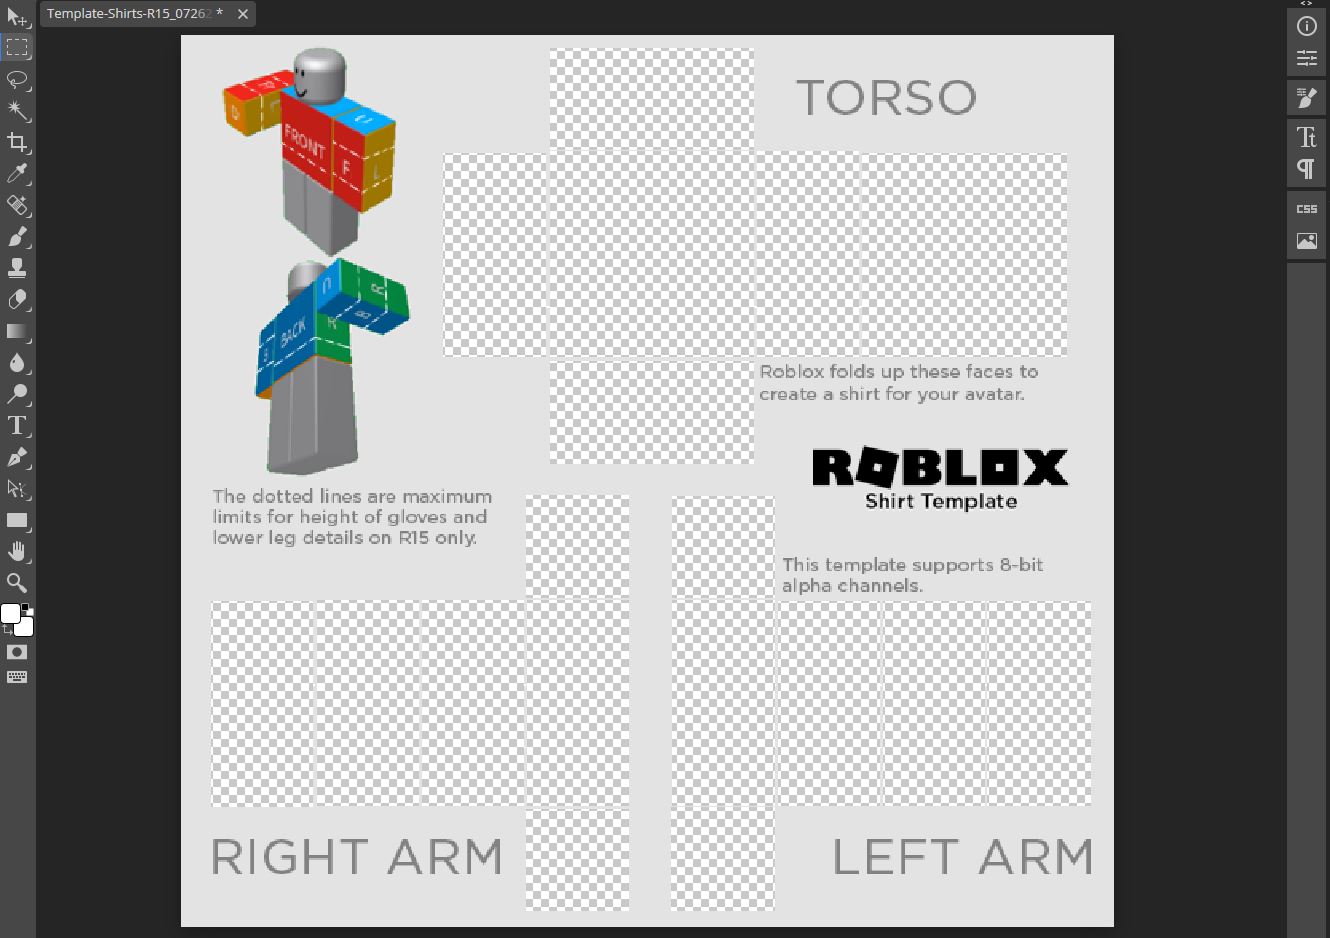 How to Make a Shirt in Roblox?